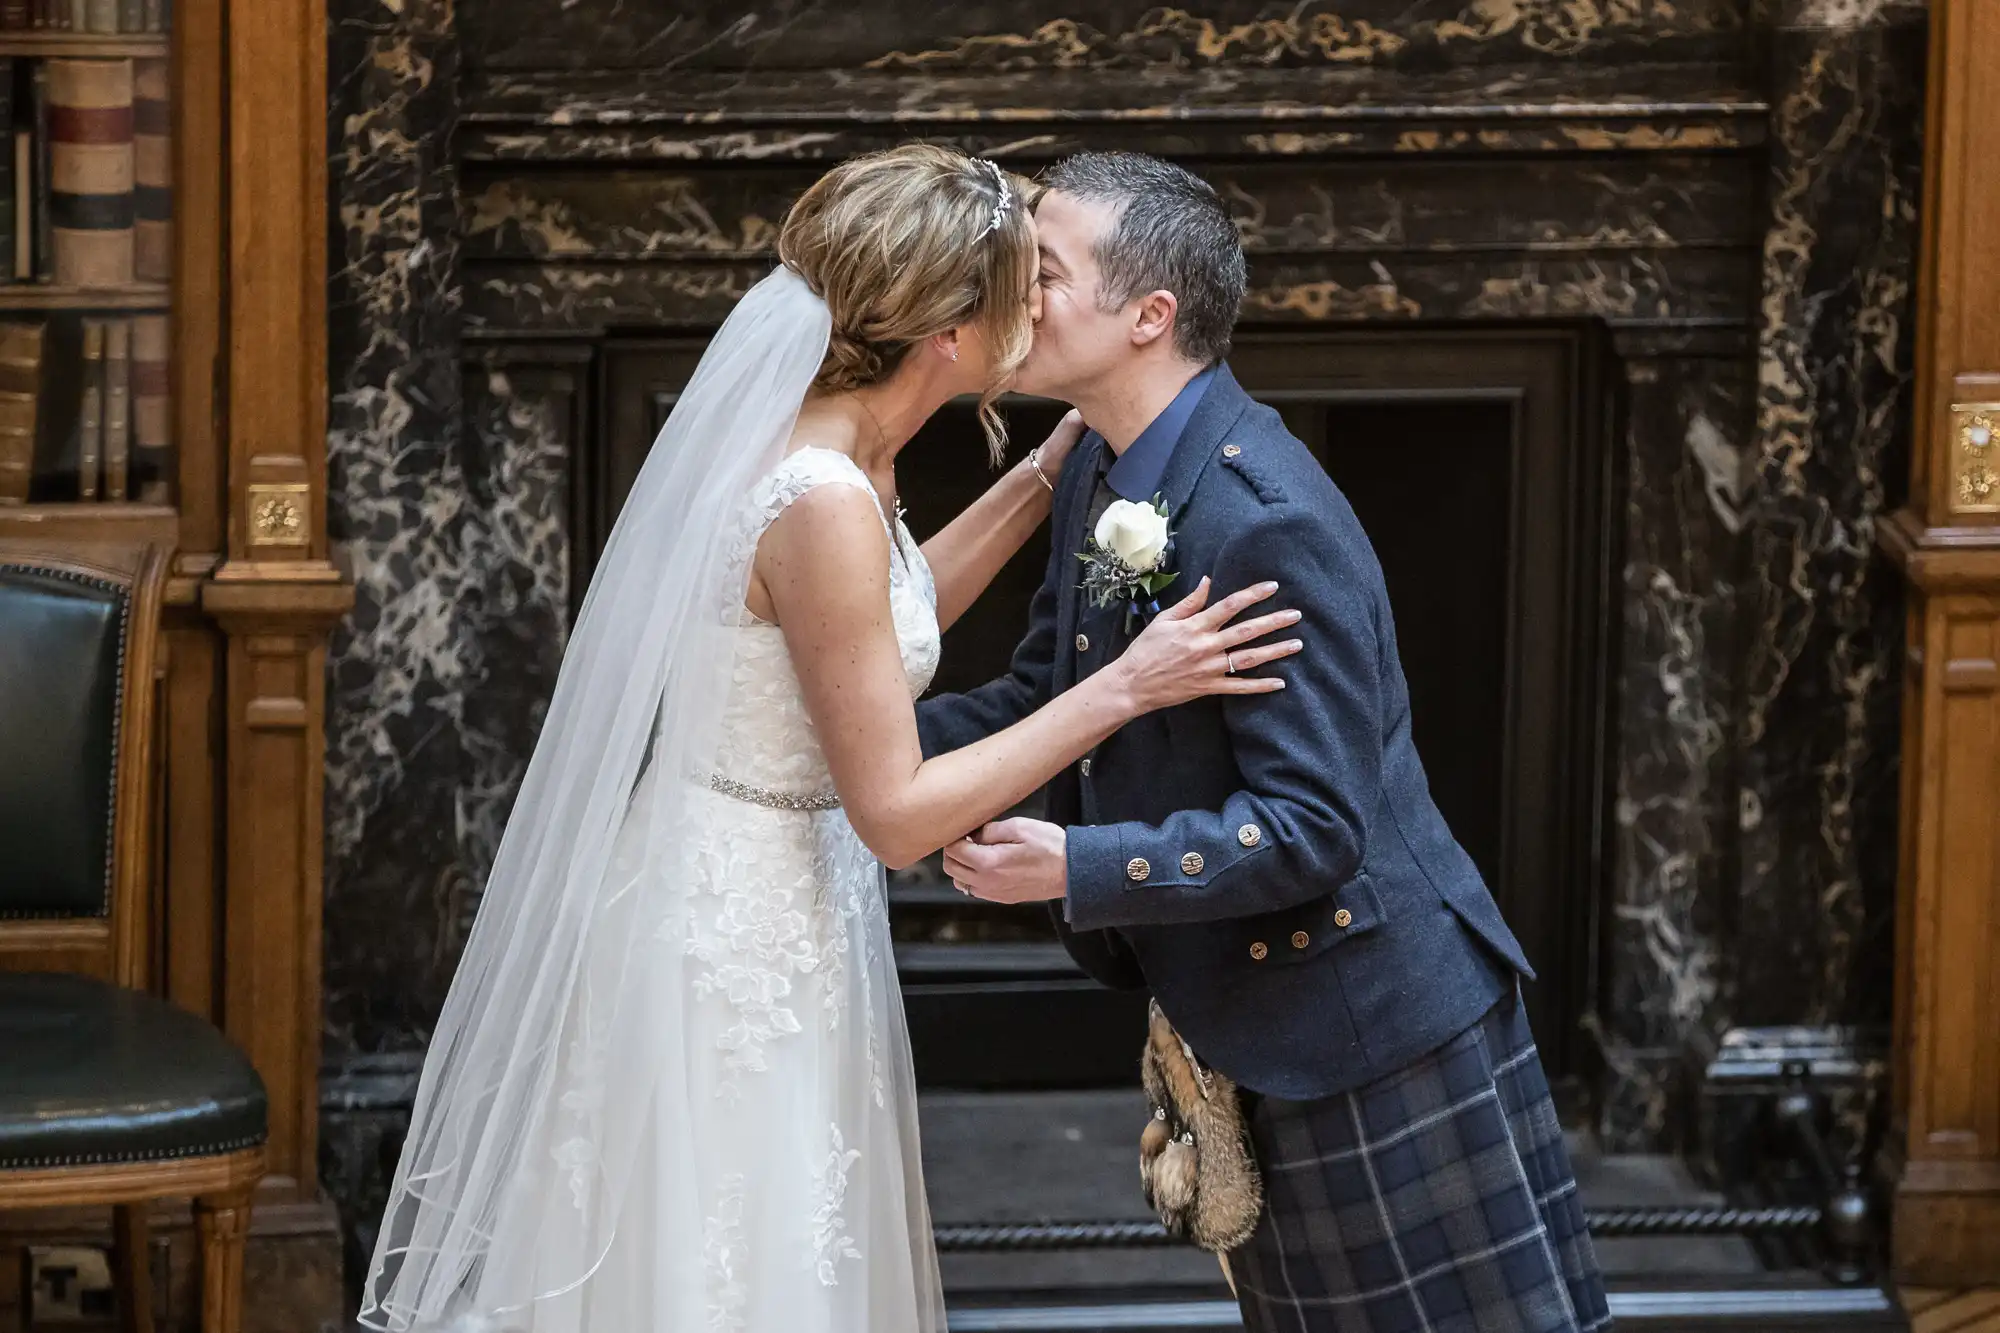 A bride in a white gown and veil kisses a groom in a tartan kilt and dark jacket in front of a marble fireplace.